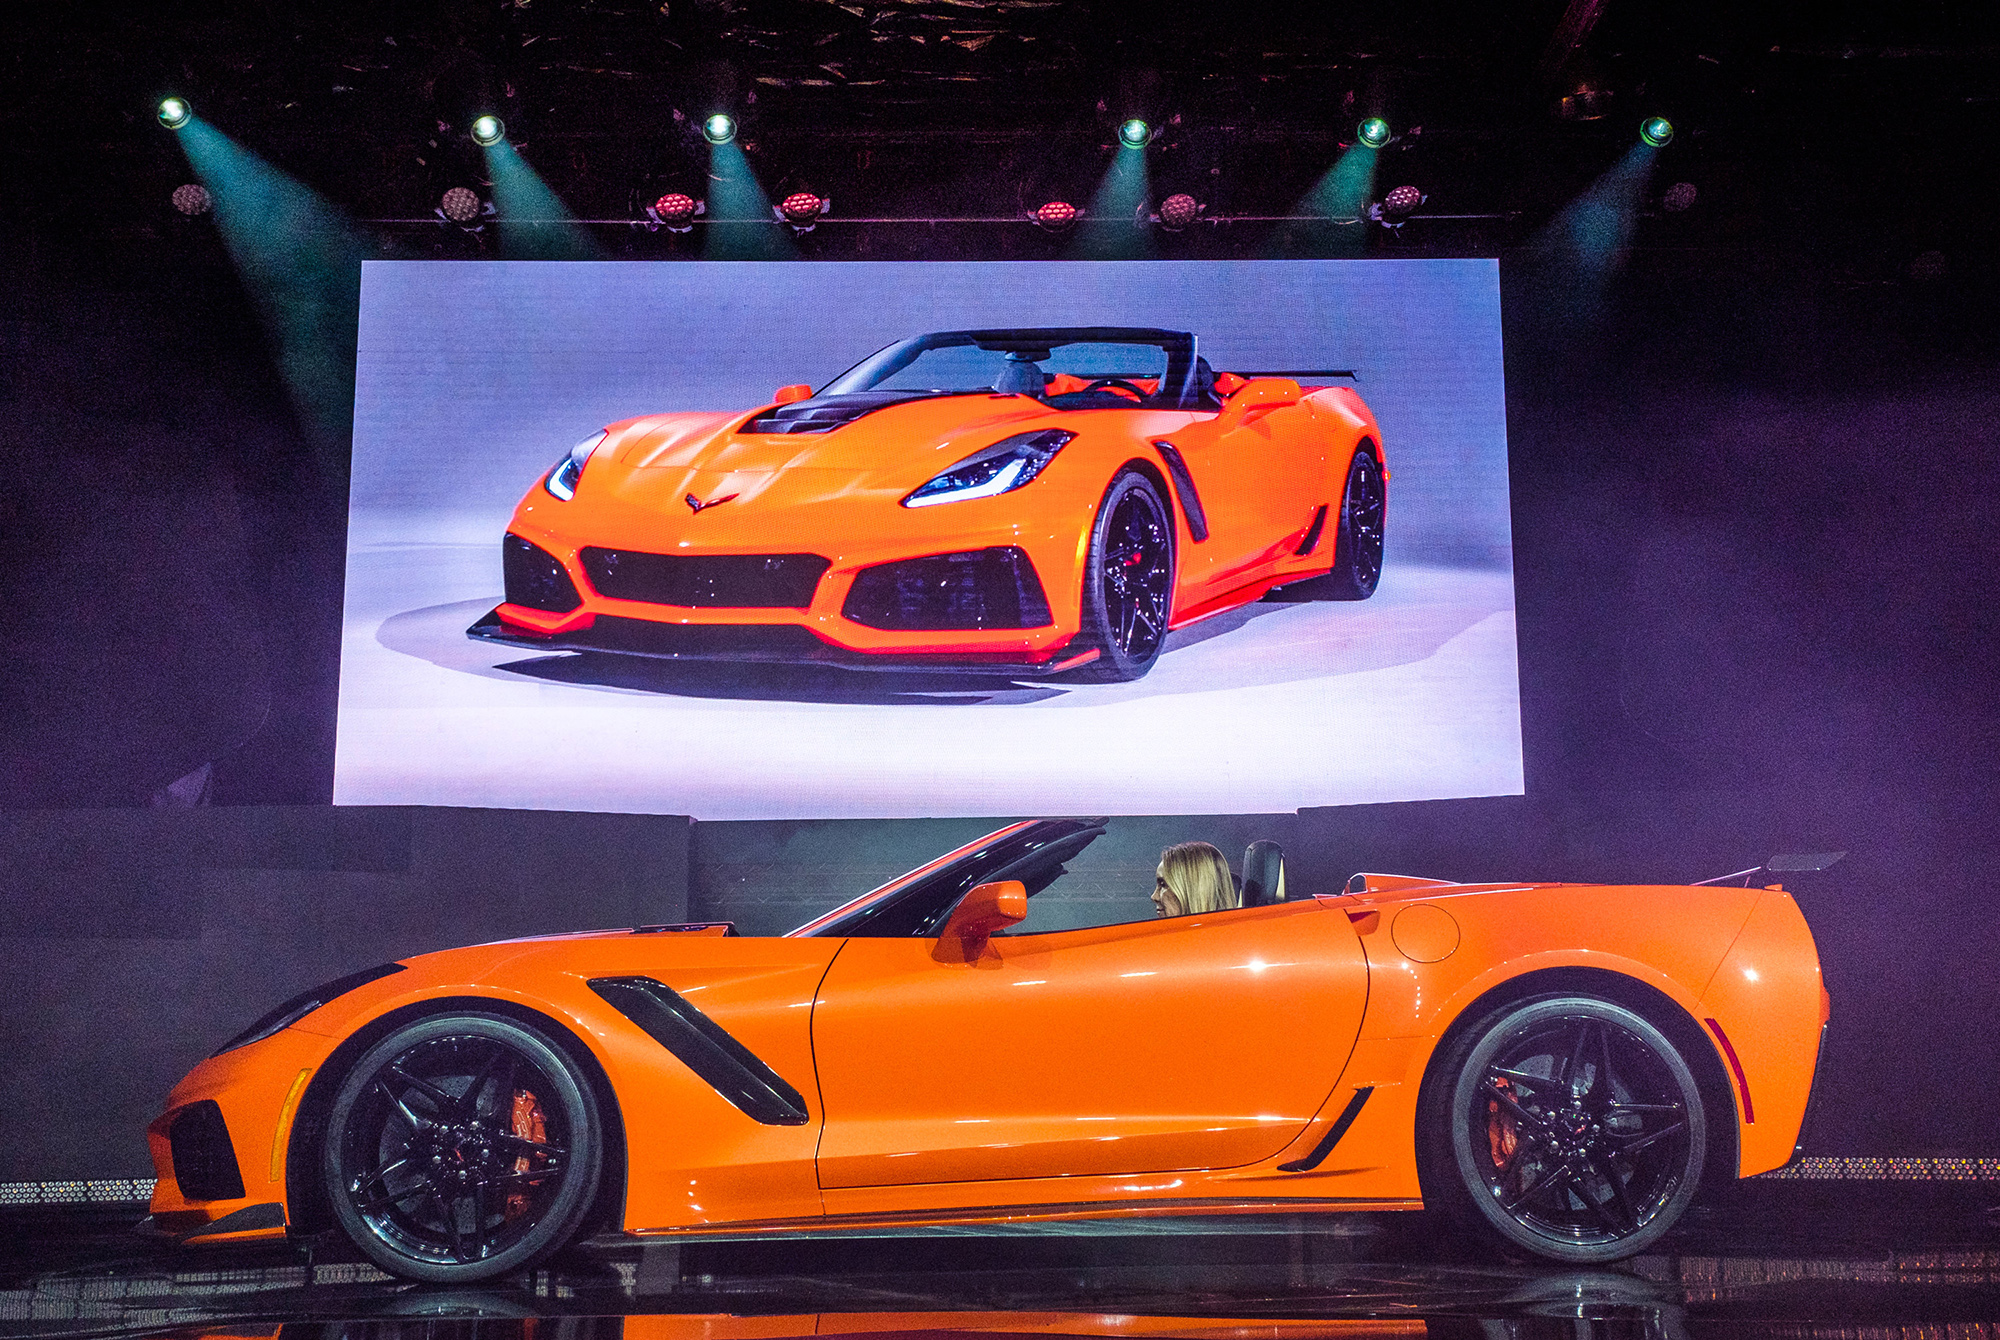 The 2019 Corvette ZR1 Convertible makes its world debut Tuesday, November 28, 2017 in Los Angeles, California. The Corvette ZR1s unique aero package is central to the coupes 212-mph top speed generated by the 755 horsepower LT5 6.2L supercharged engine. The ZR1 convertible will start at $123,995 and will go on sale in the spring of 2018. (Photo by Steve Fecht for Chevrolet)